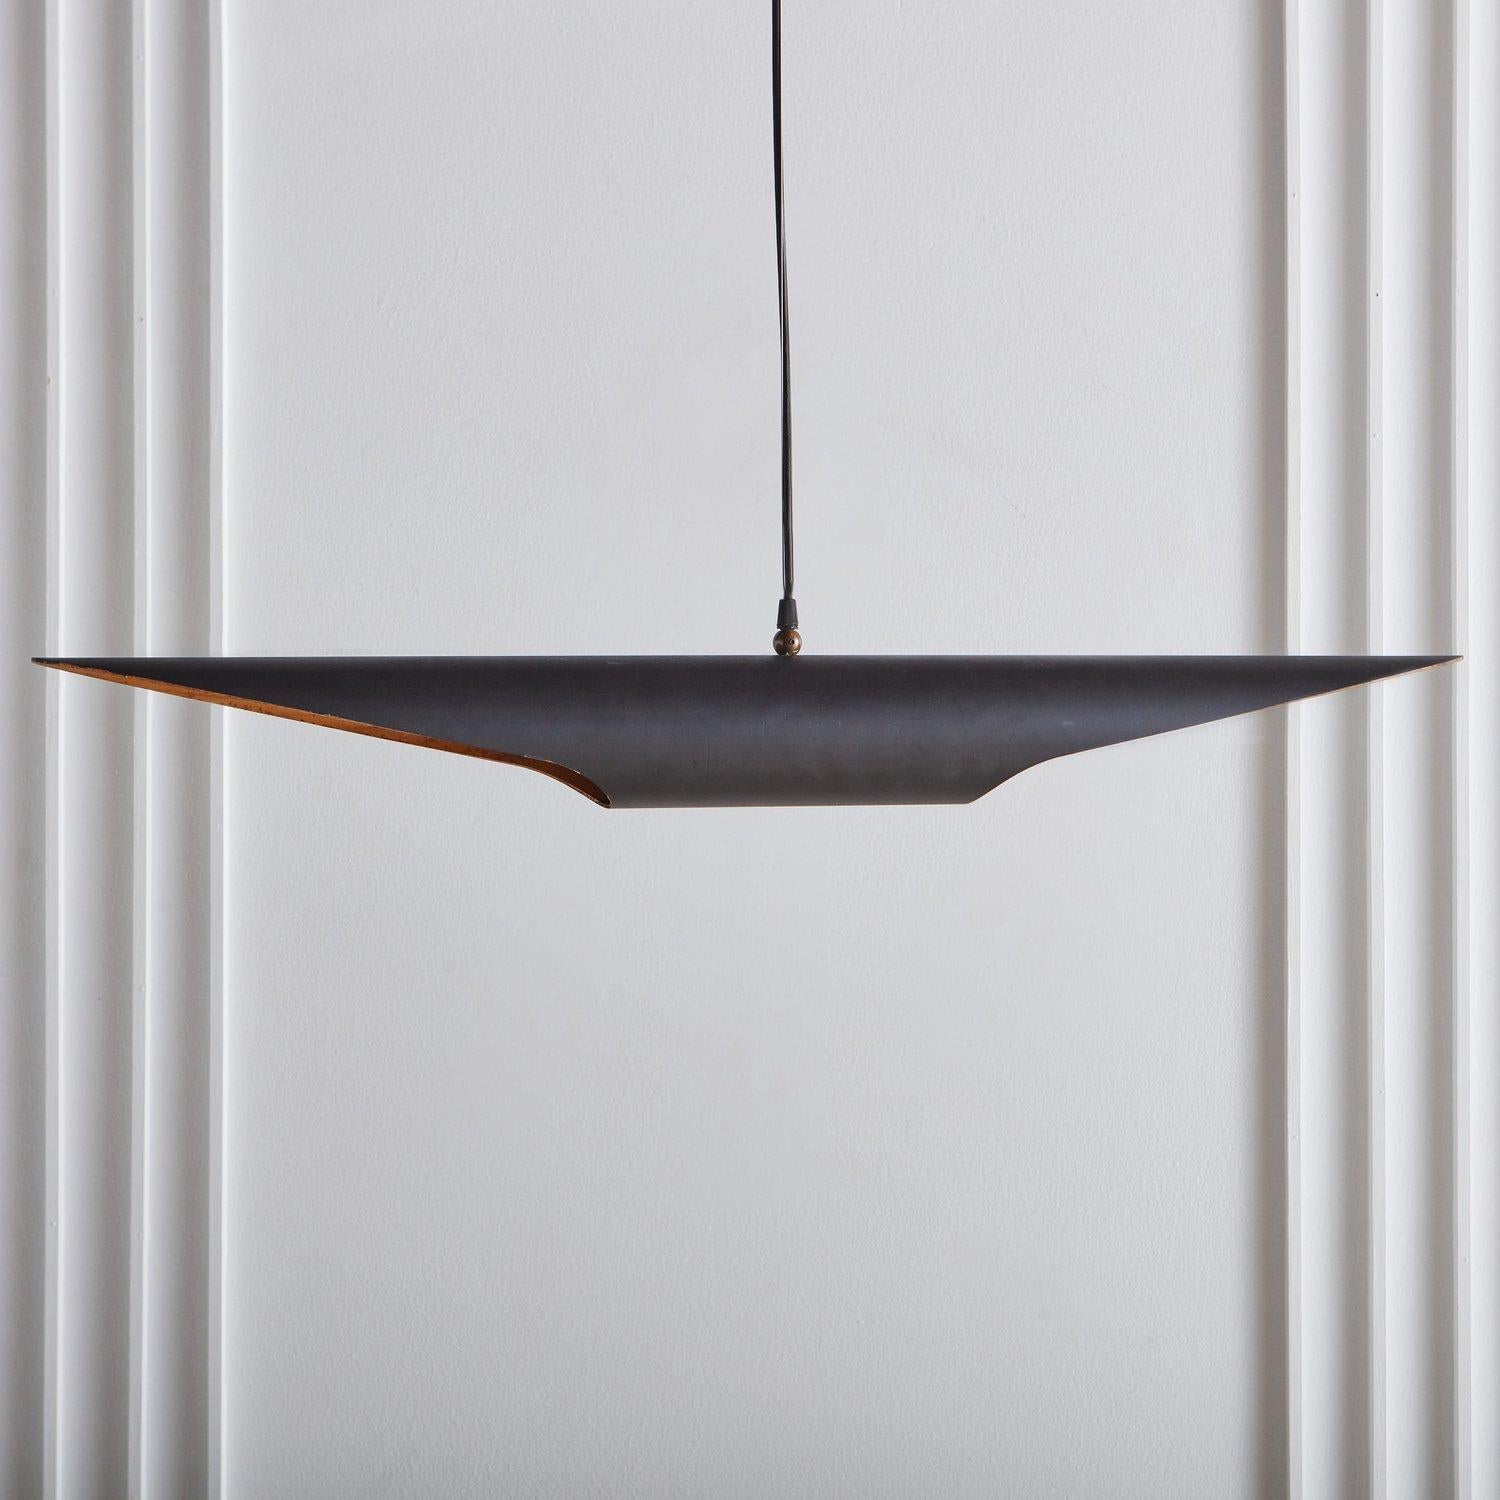 A striking vintage Italian pendant light featuring an elongated steel tubular body which was powder coated matte black and has sharply angled edges. It has a gorgeous hand applied gold leaf interior and hangs from a black cord with a new black